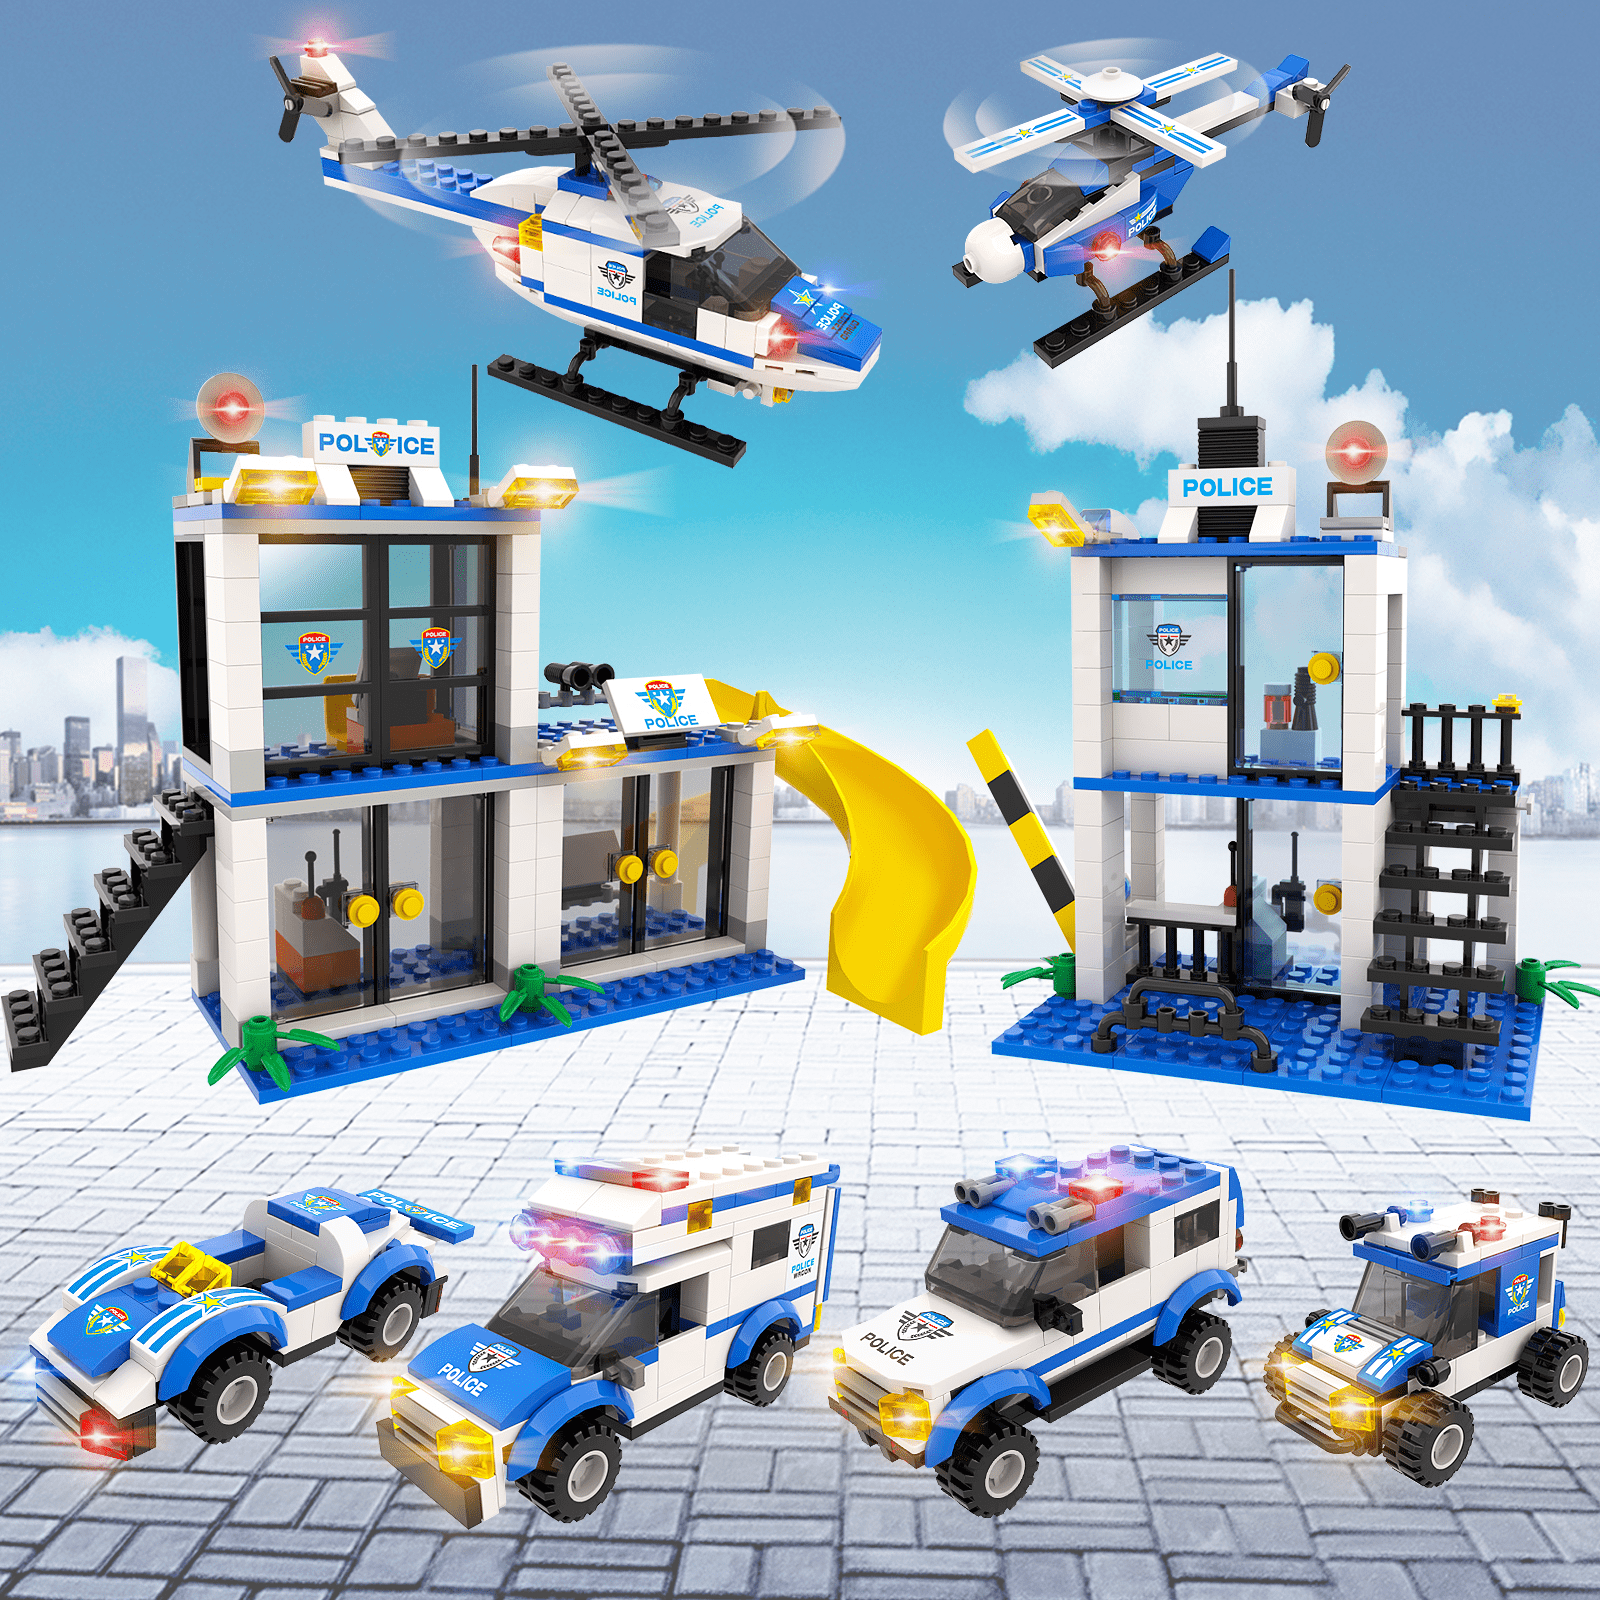 792 pcs Police Building Blocks Toy Set 8-in-1 Robot Truck Aircraft Car Boat Army 